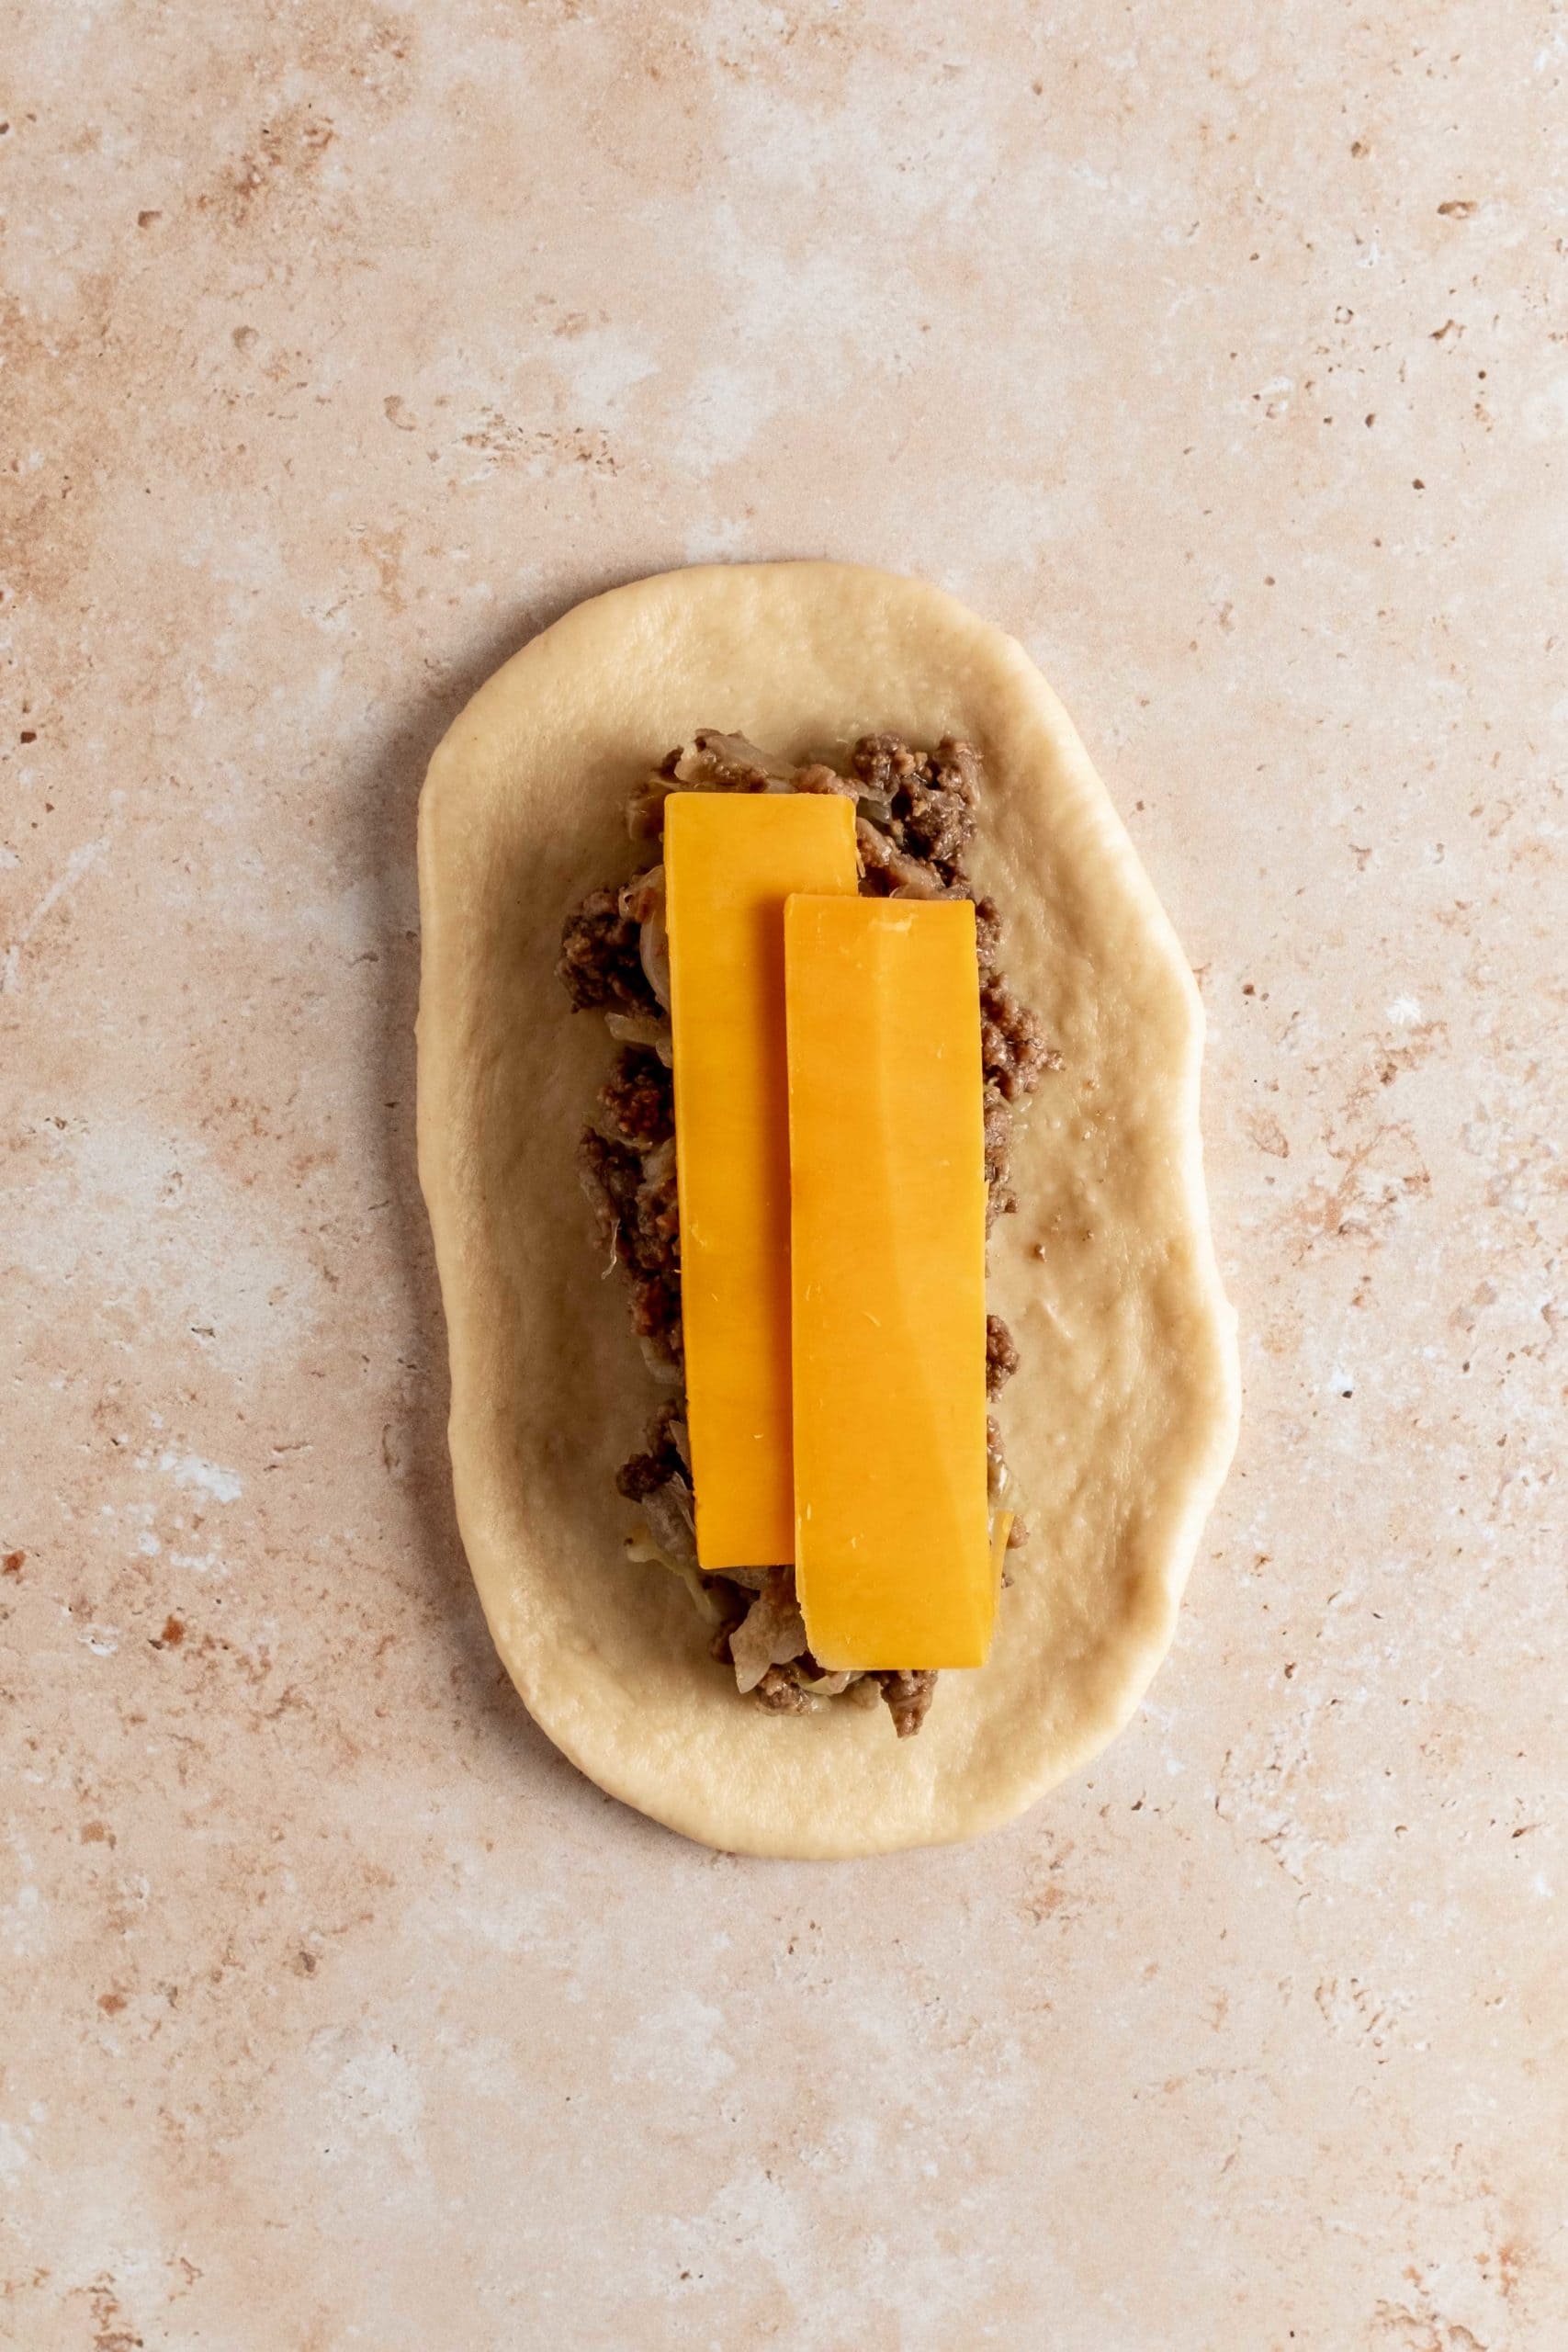 rolled out dough with beef, cabbage and cheese